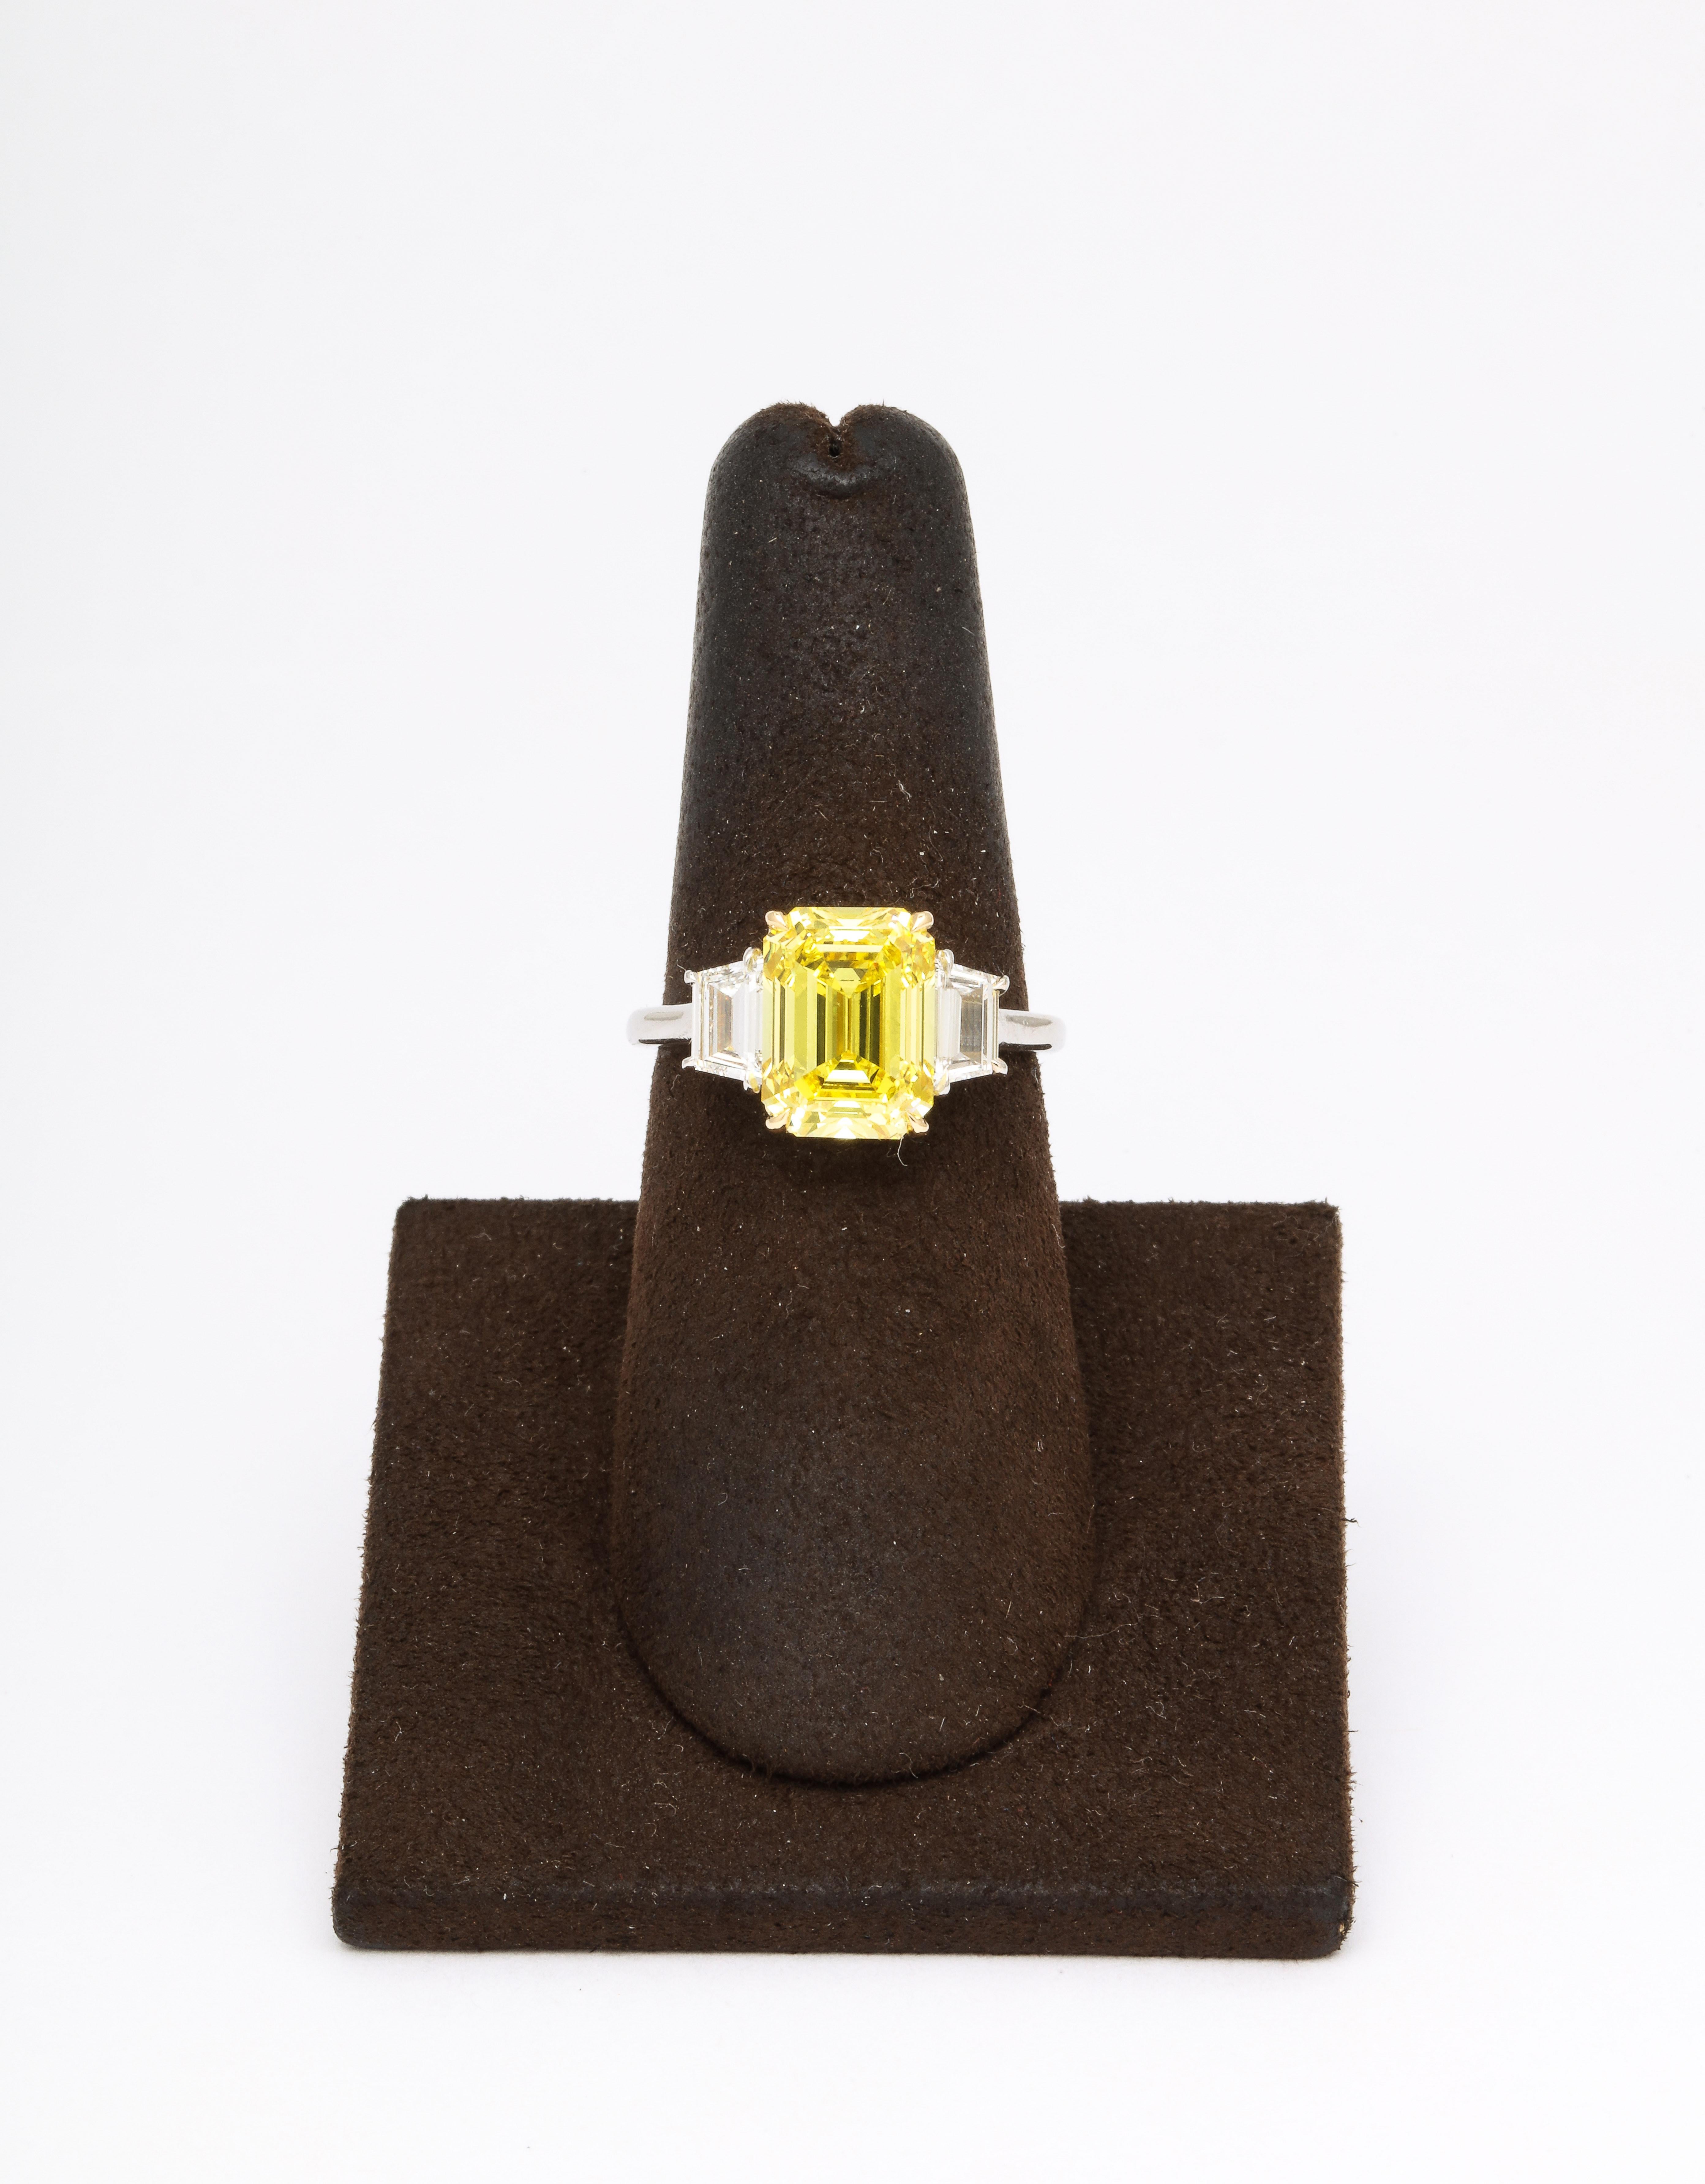 
Rare and Unique!

GIA certified 4.12 carat Fancy Vivid Yellow, VS2, Emerald cut center diamond. 

Set with .64 carats of white step cut trapezoid diamonds. 

Beautiful rectangular shape! 

An Emerald cut, Fancy Vivid Yellow diamond with these